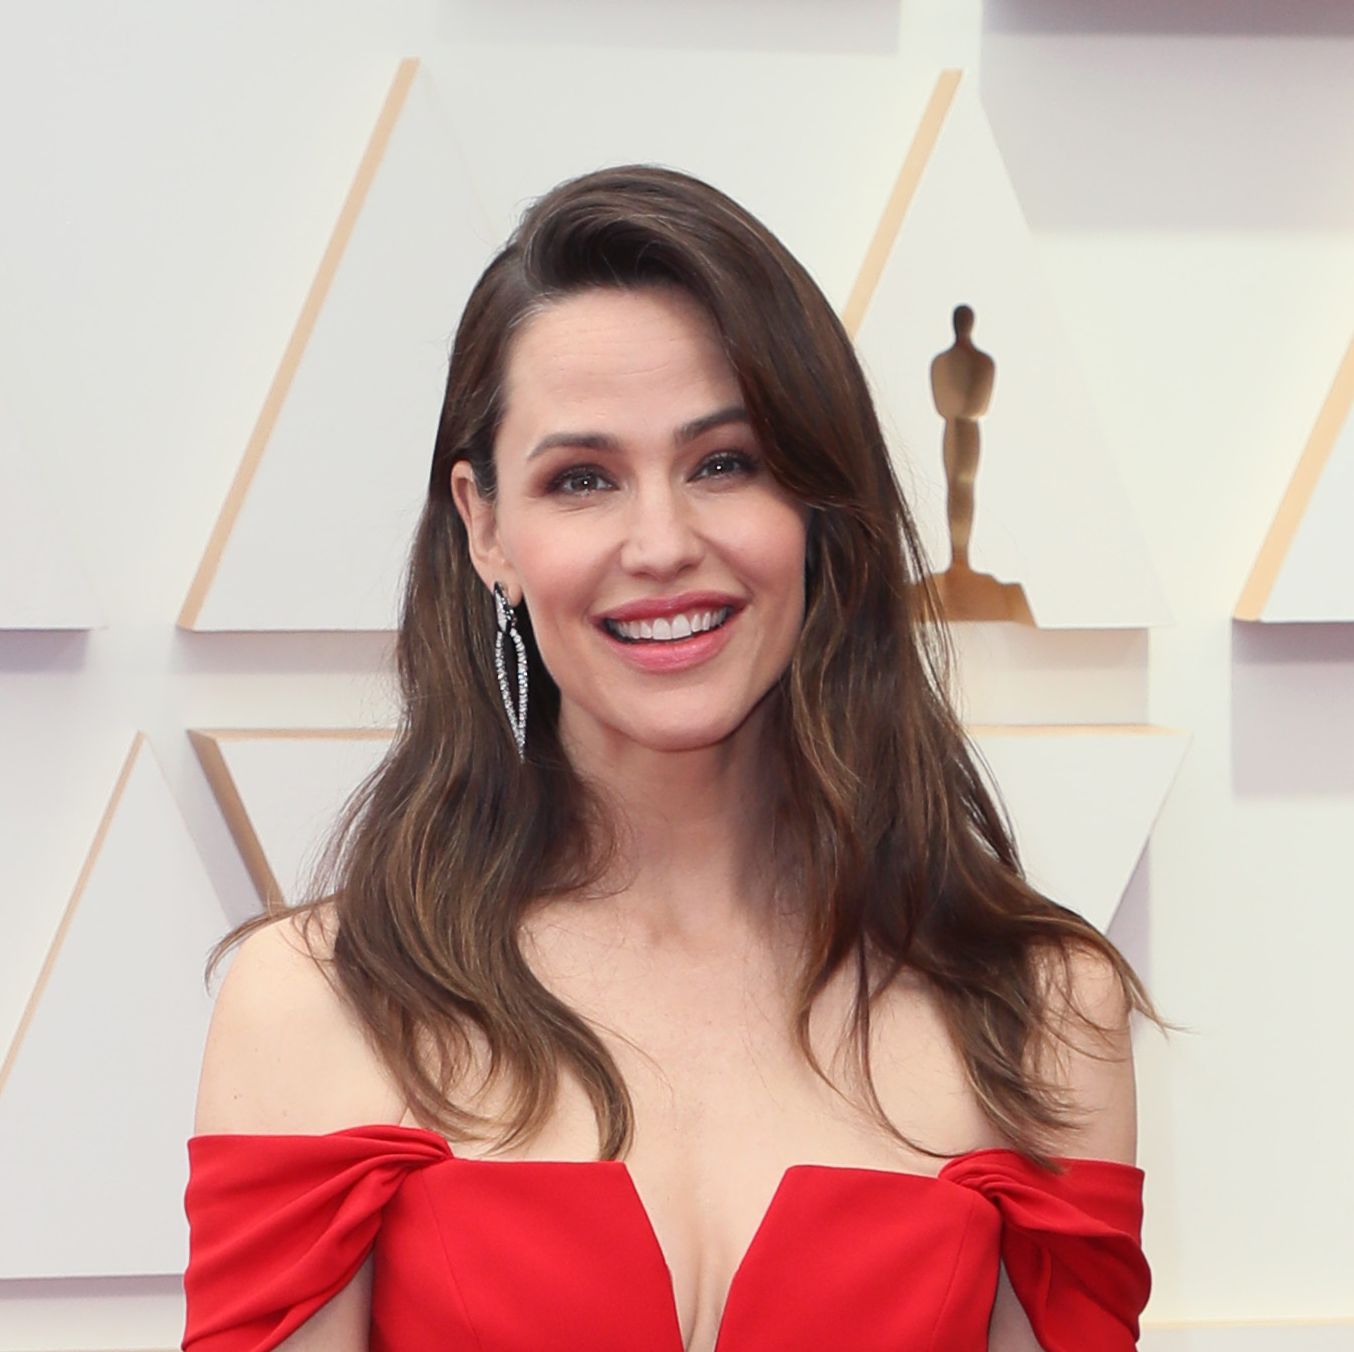 Jennifer Garner Just Debuted a Jaw-Dropping New Look